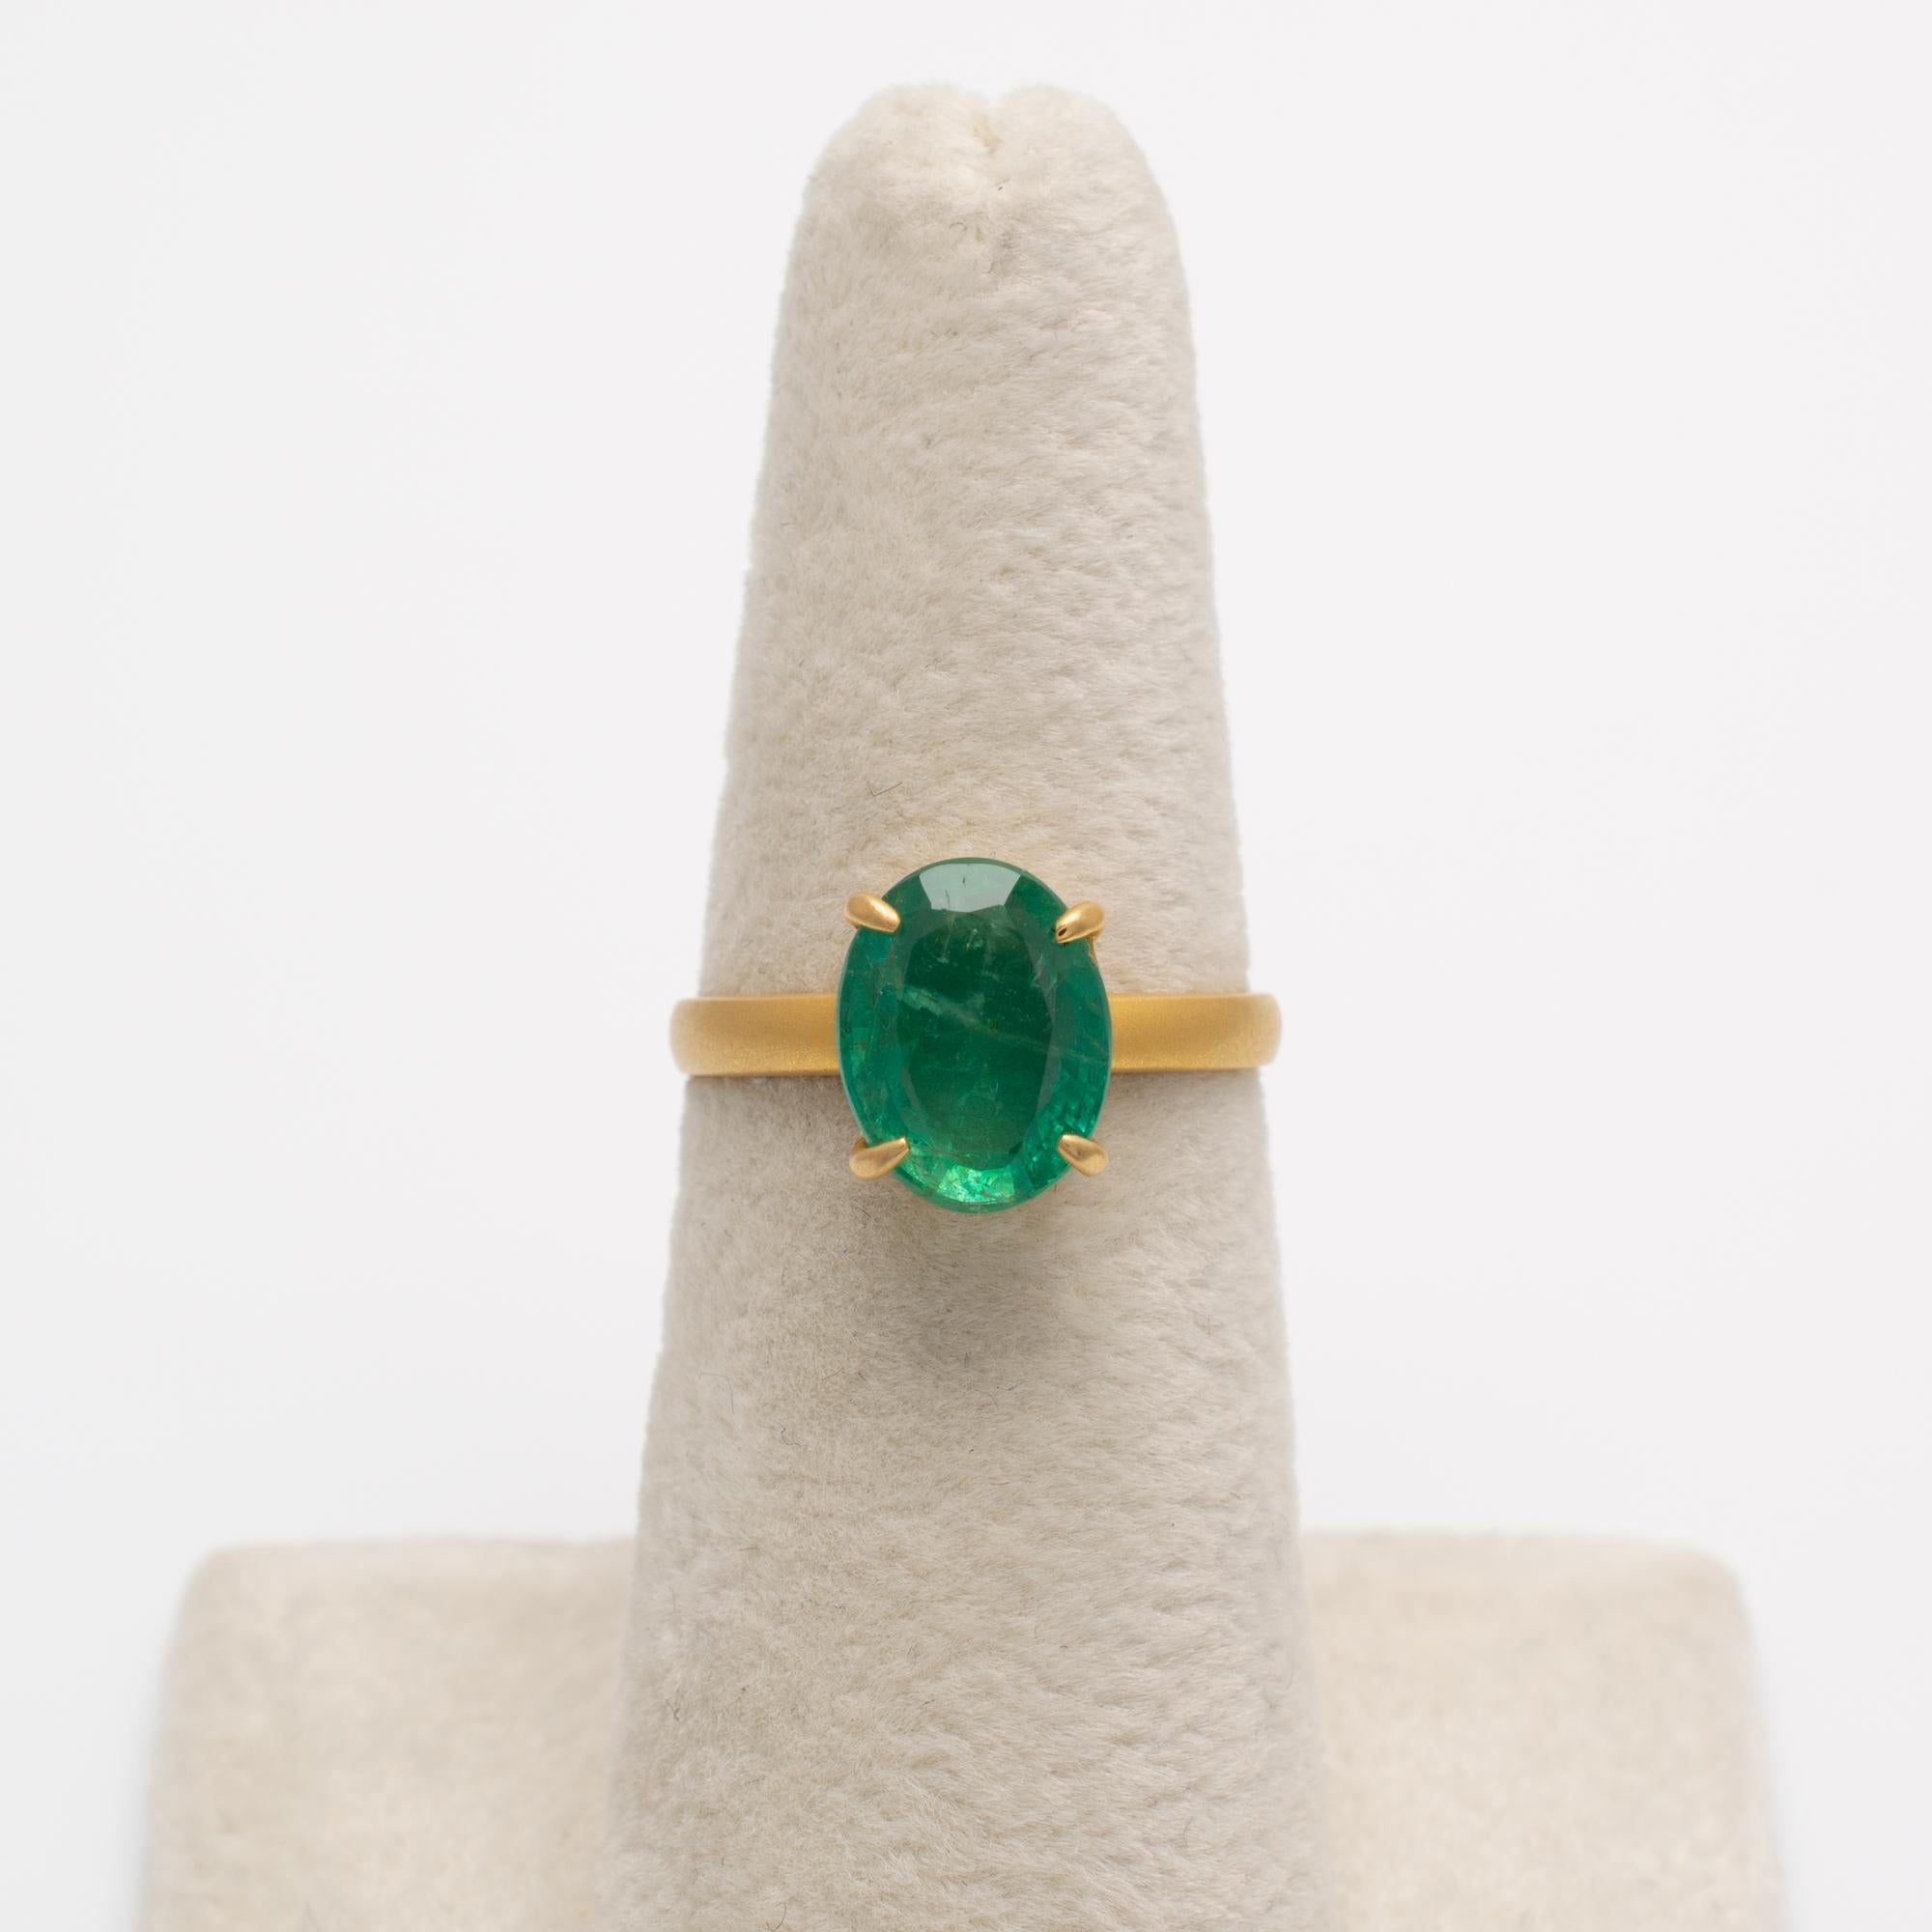 This natural oval-cut emerald solitaire ring is made in 18 karat yellow gold with a contemporary matte finish.

The emerald is beautiful in quality with a smooth surface and lovely natural inclusions. We have shown a couple of shots in bright